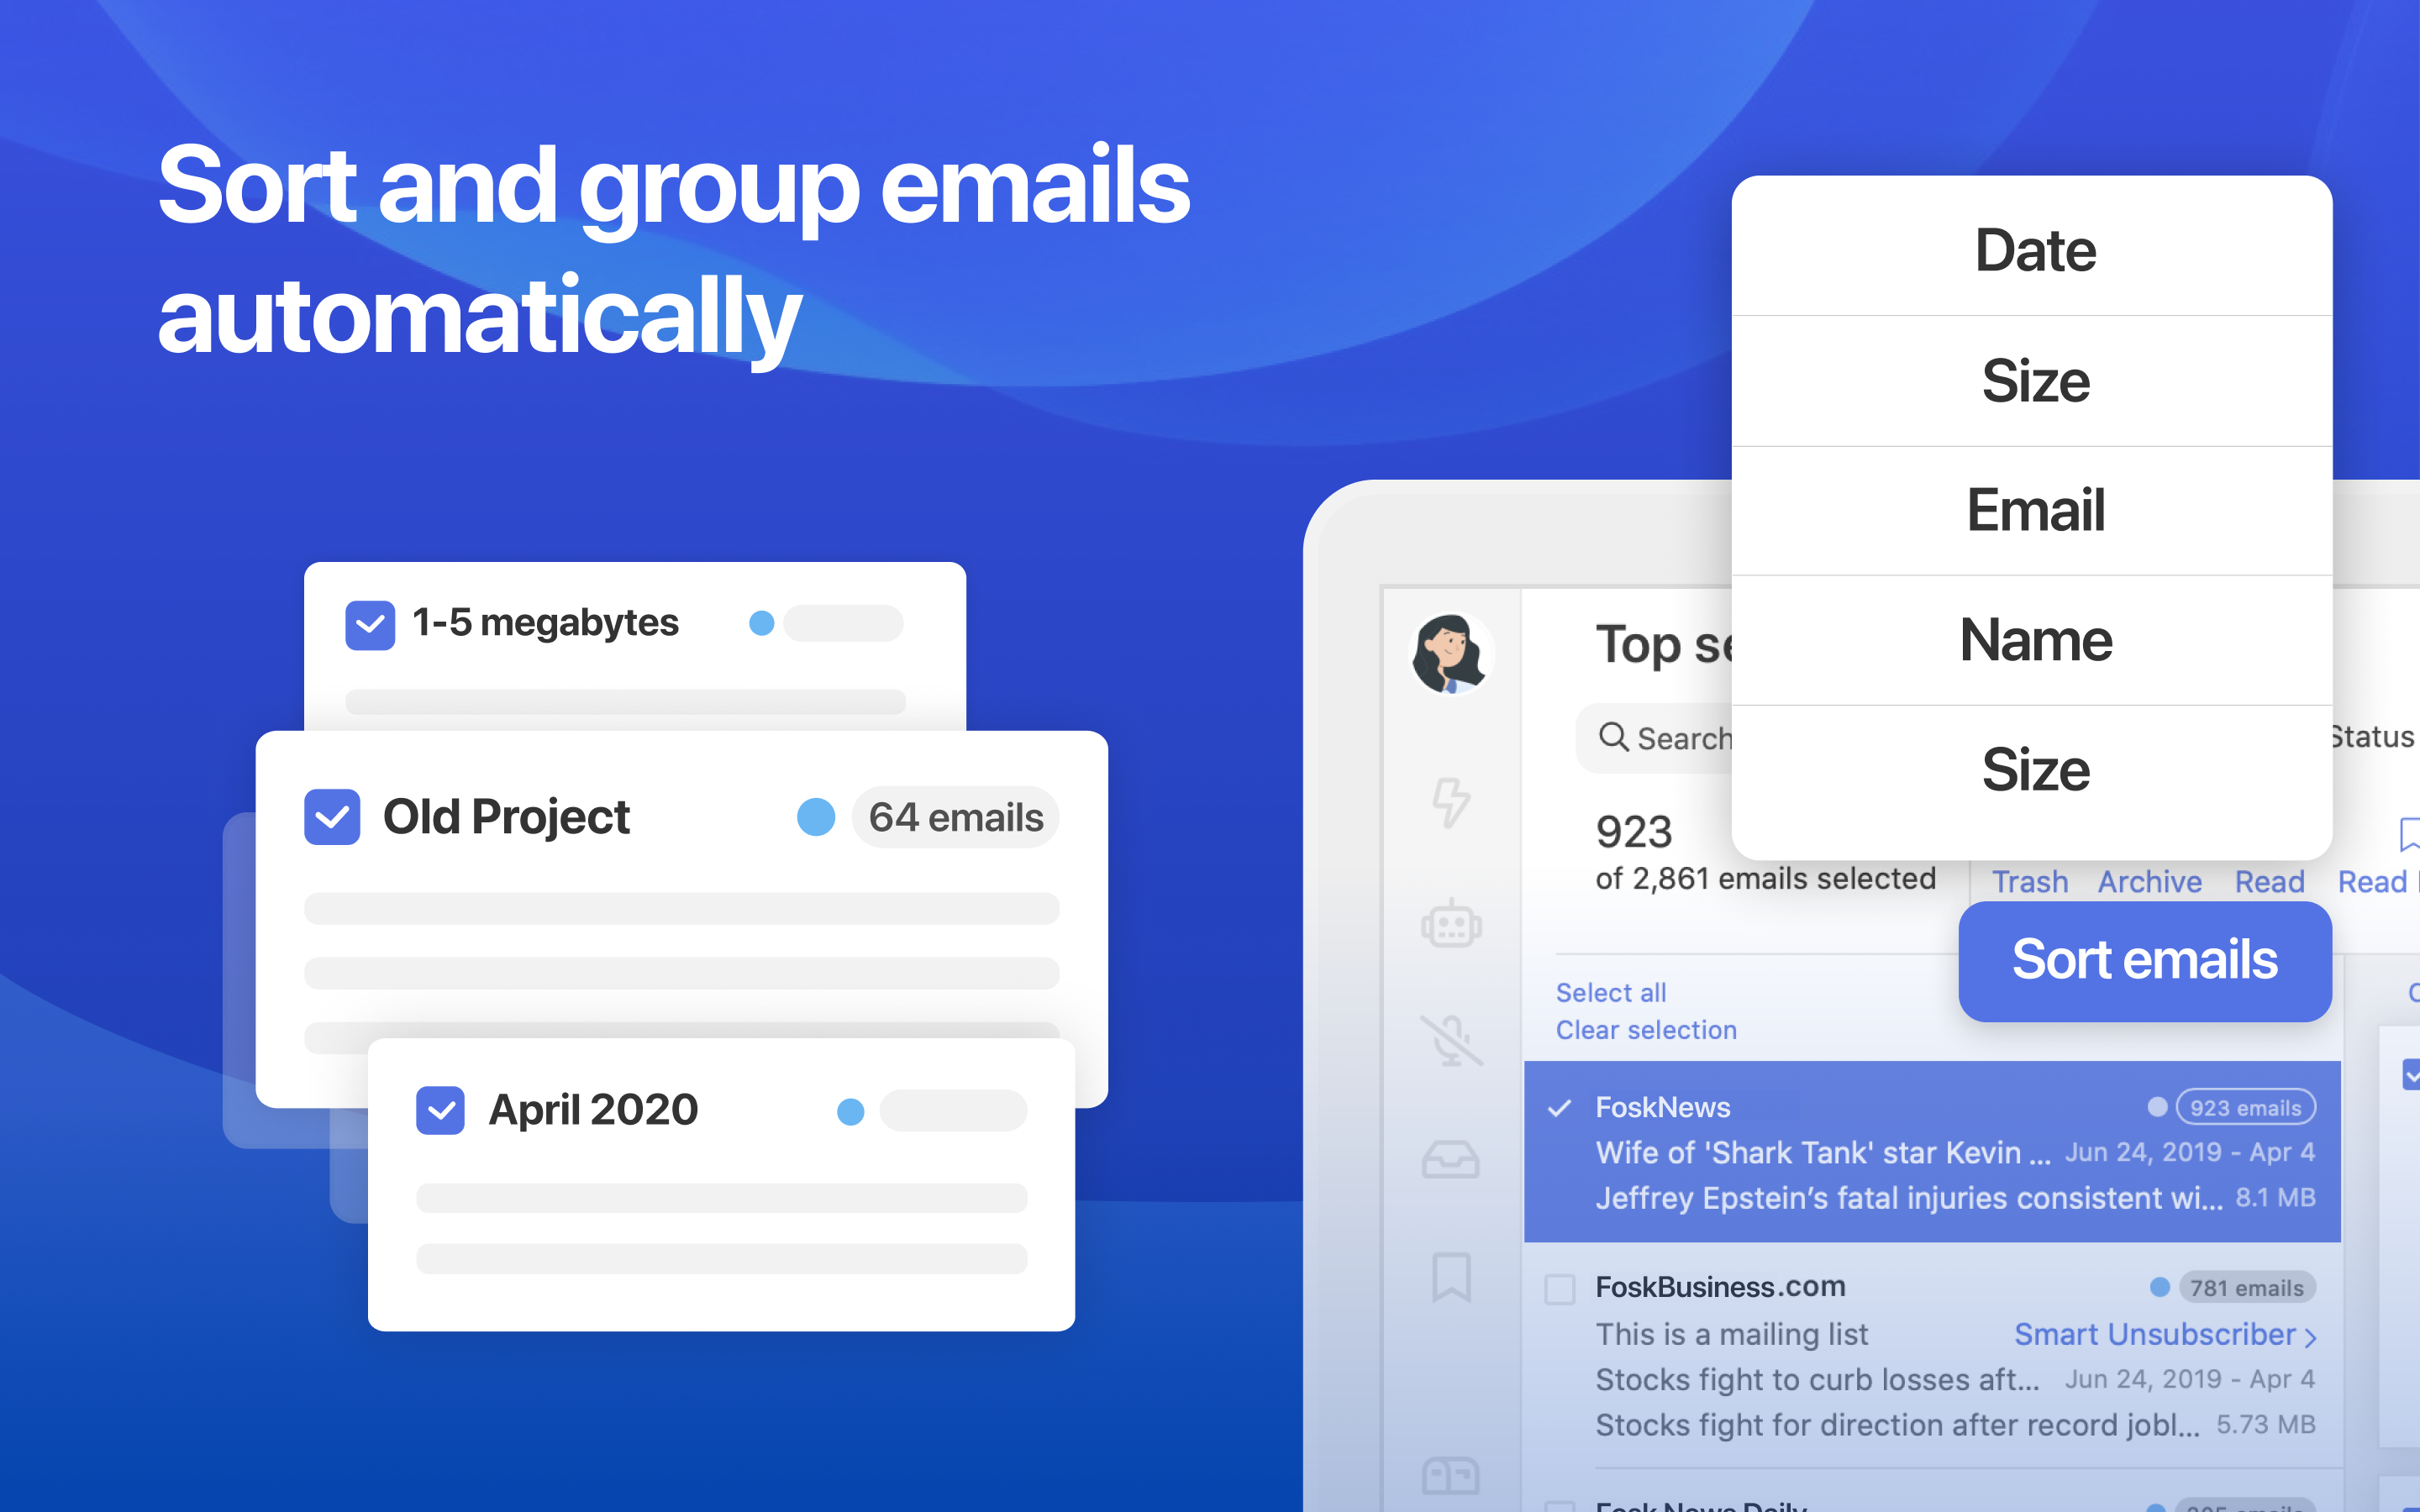 Sort and group emails automatically